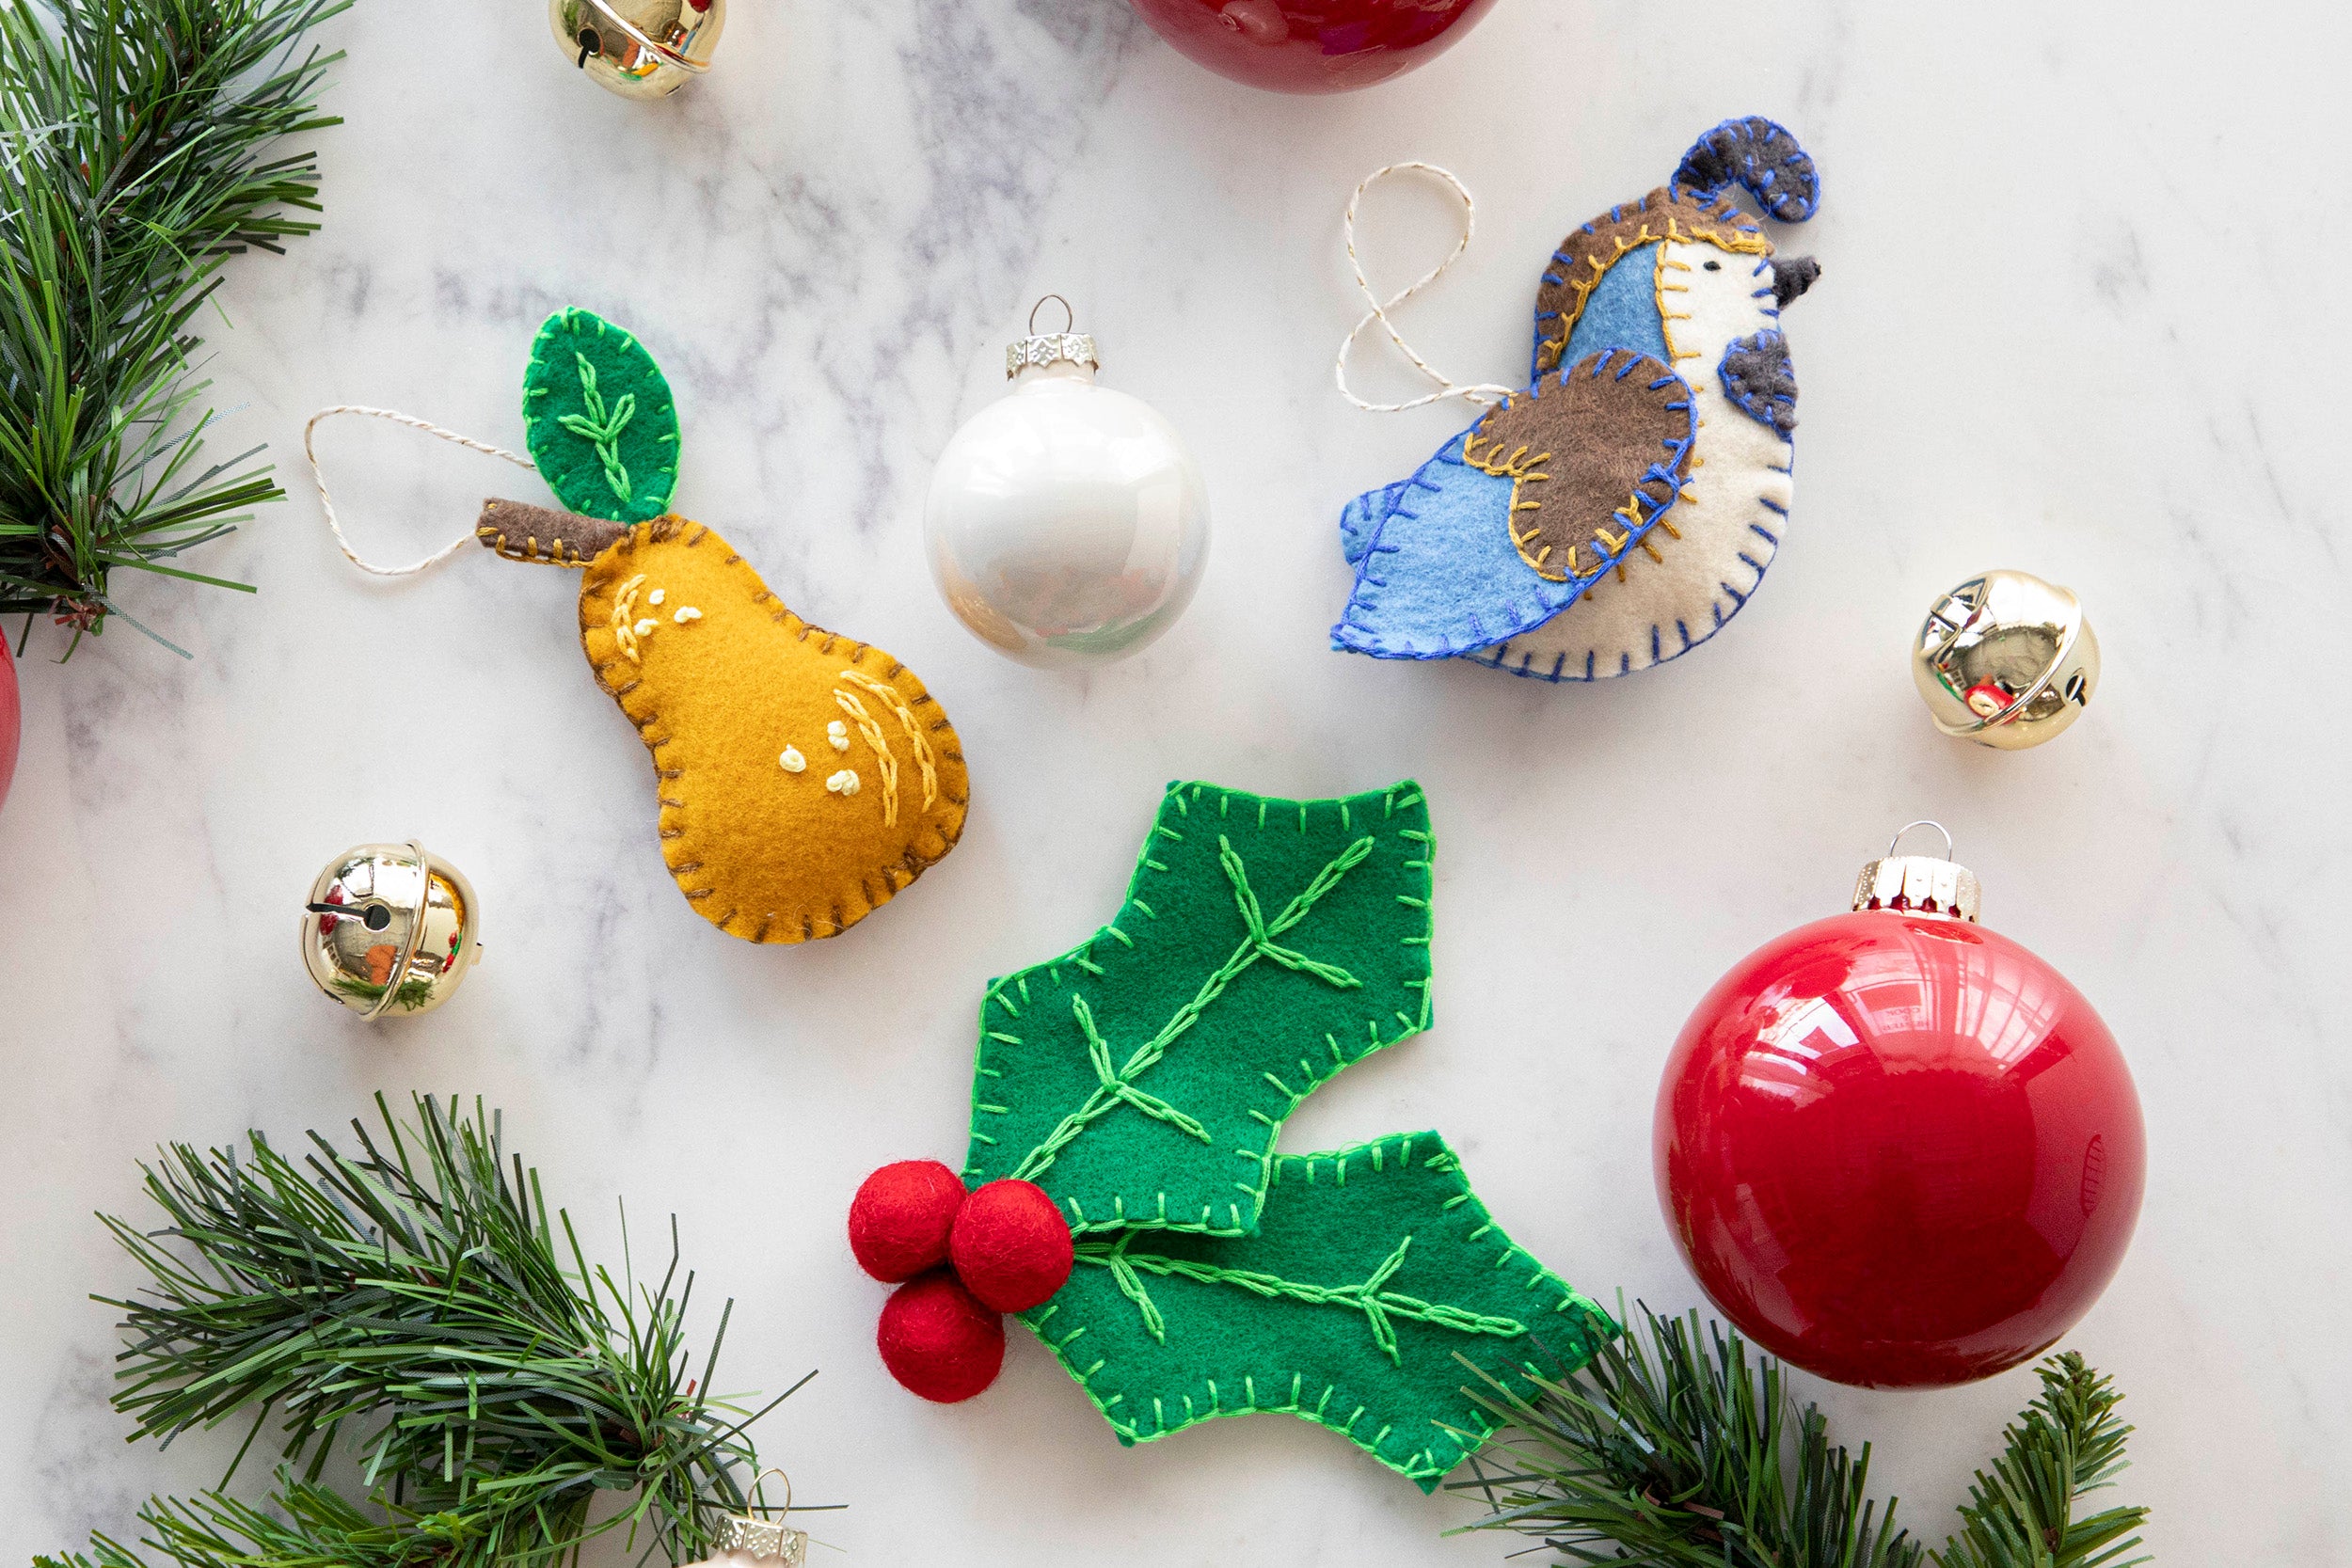 Christmas Crafts for Adults with Disabilities - BLOG